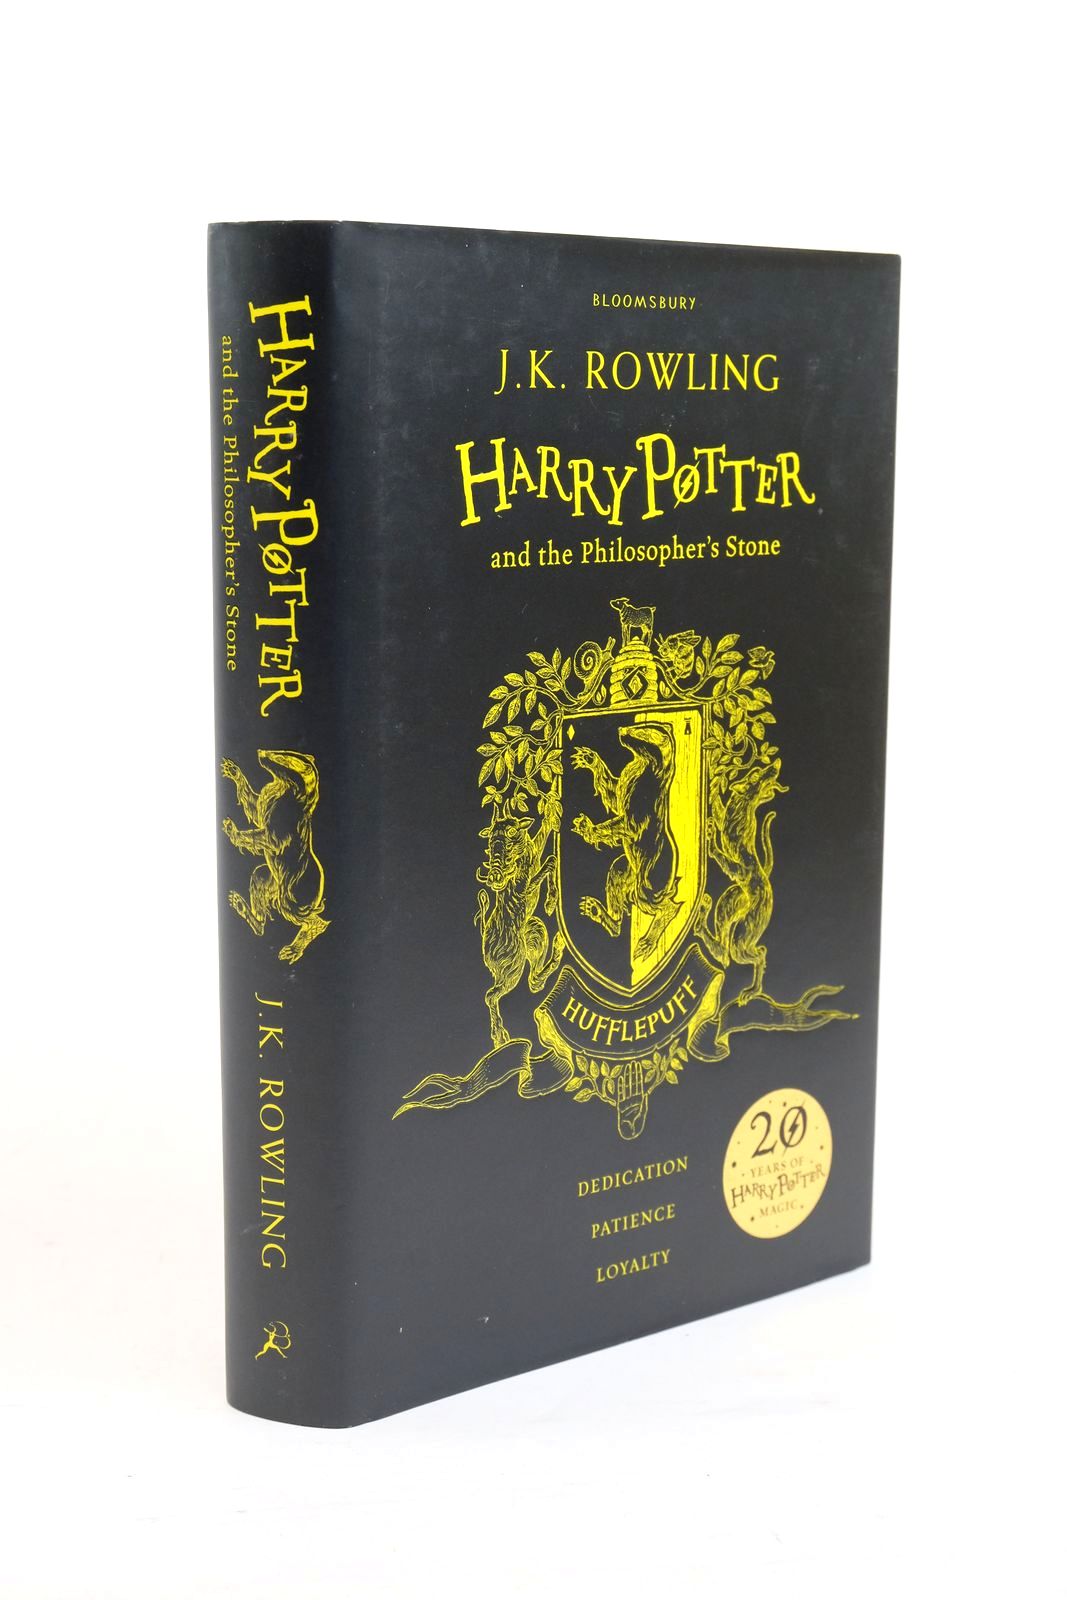 Photo of HARRY POTTER AND THE PHILOSOPHER'S STONE written by Rowling, J.K. illustrated by Pinfold, Levi published by Bloomsbury (STOCK CODE: 1321173)  for sale by Stella & Rose's Books